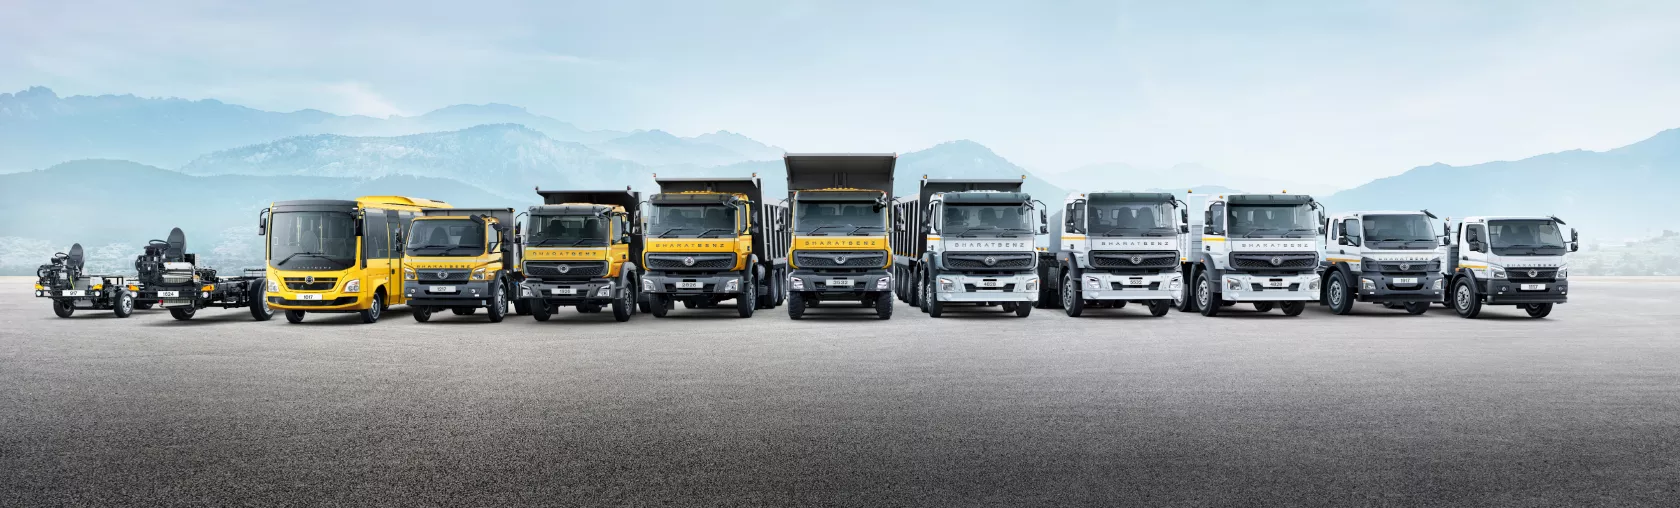 Transforming Indian Commercial Vehicle Industry through adaptive mobility solutions.